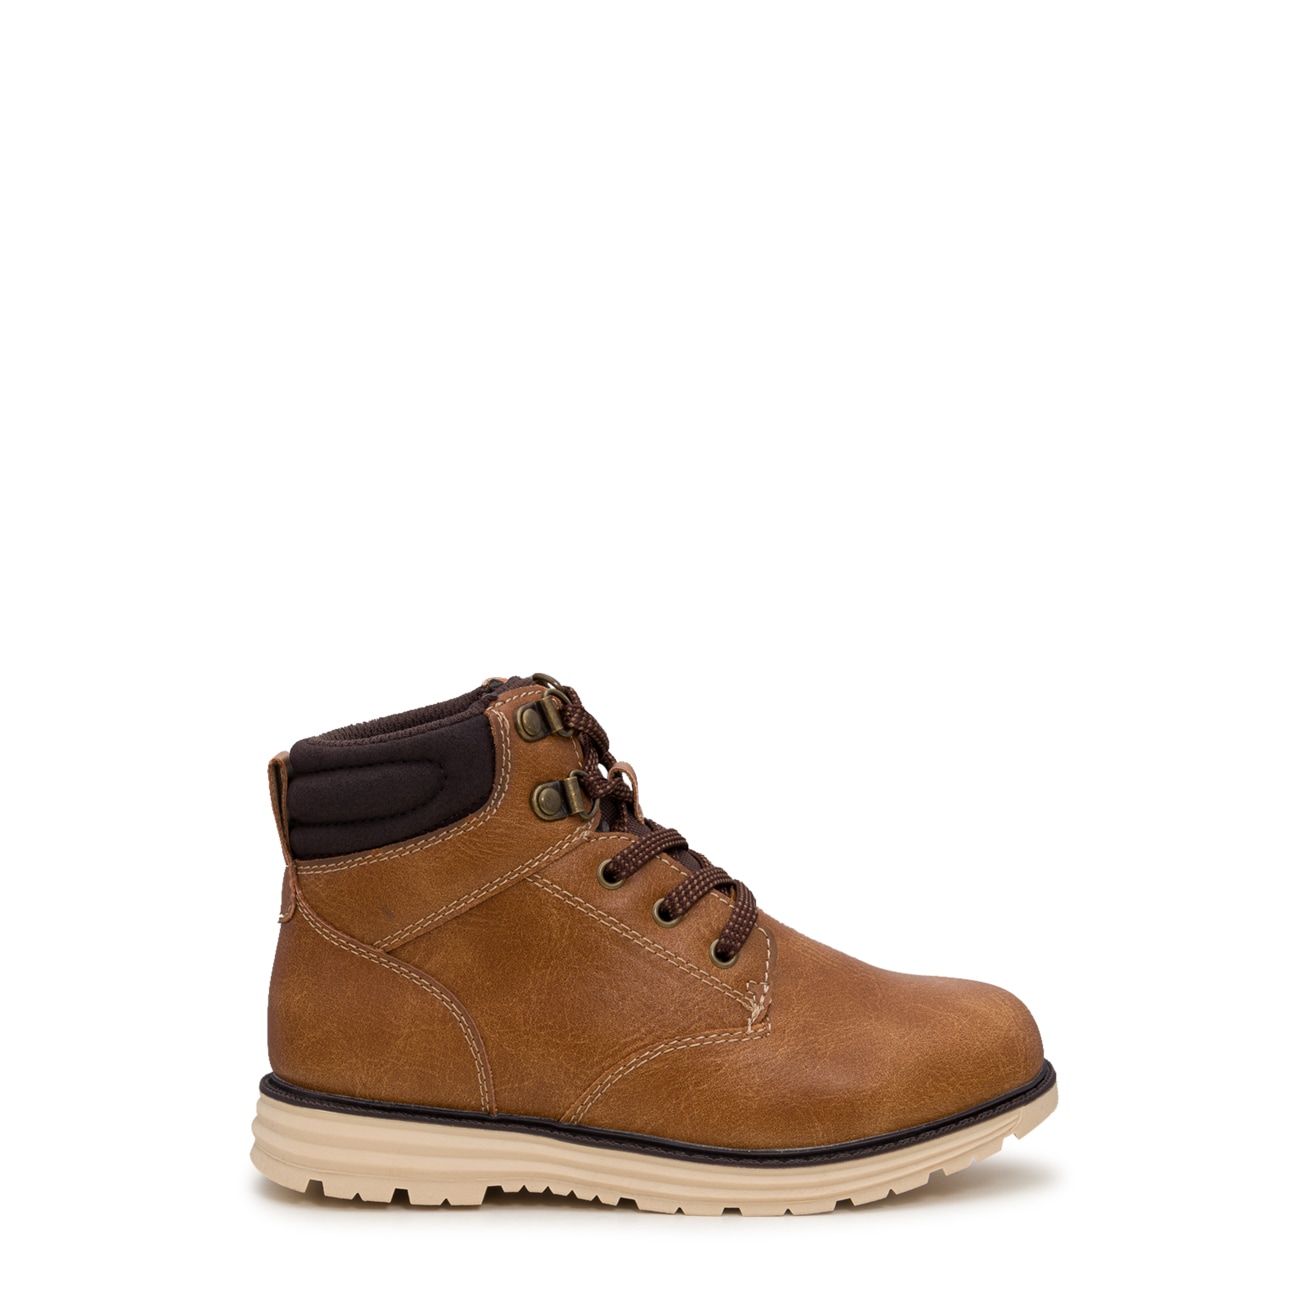 Crown Vintage Youth Boys' James Boot | The Shoe Company